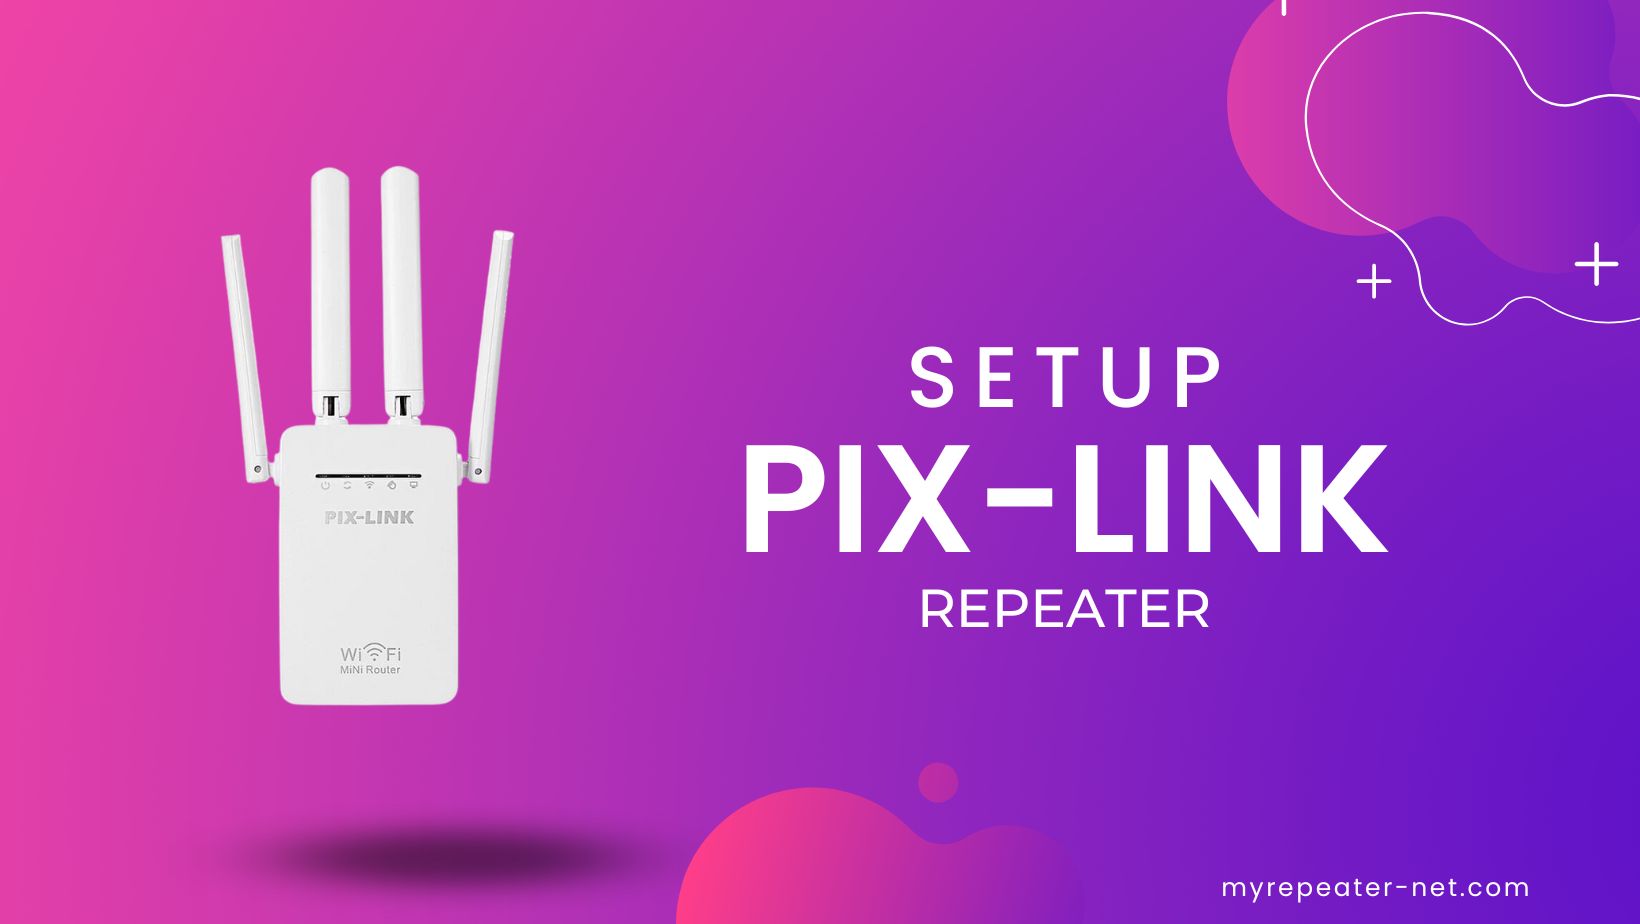 How to Set up Pix-link Repeater